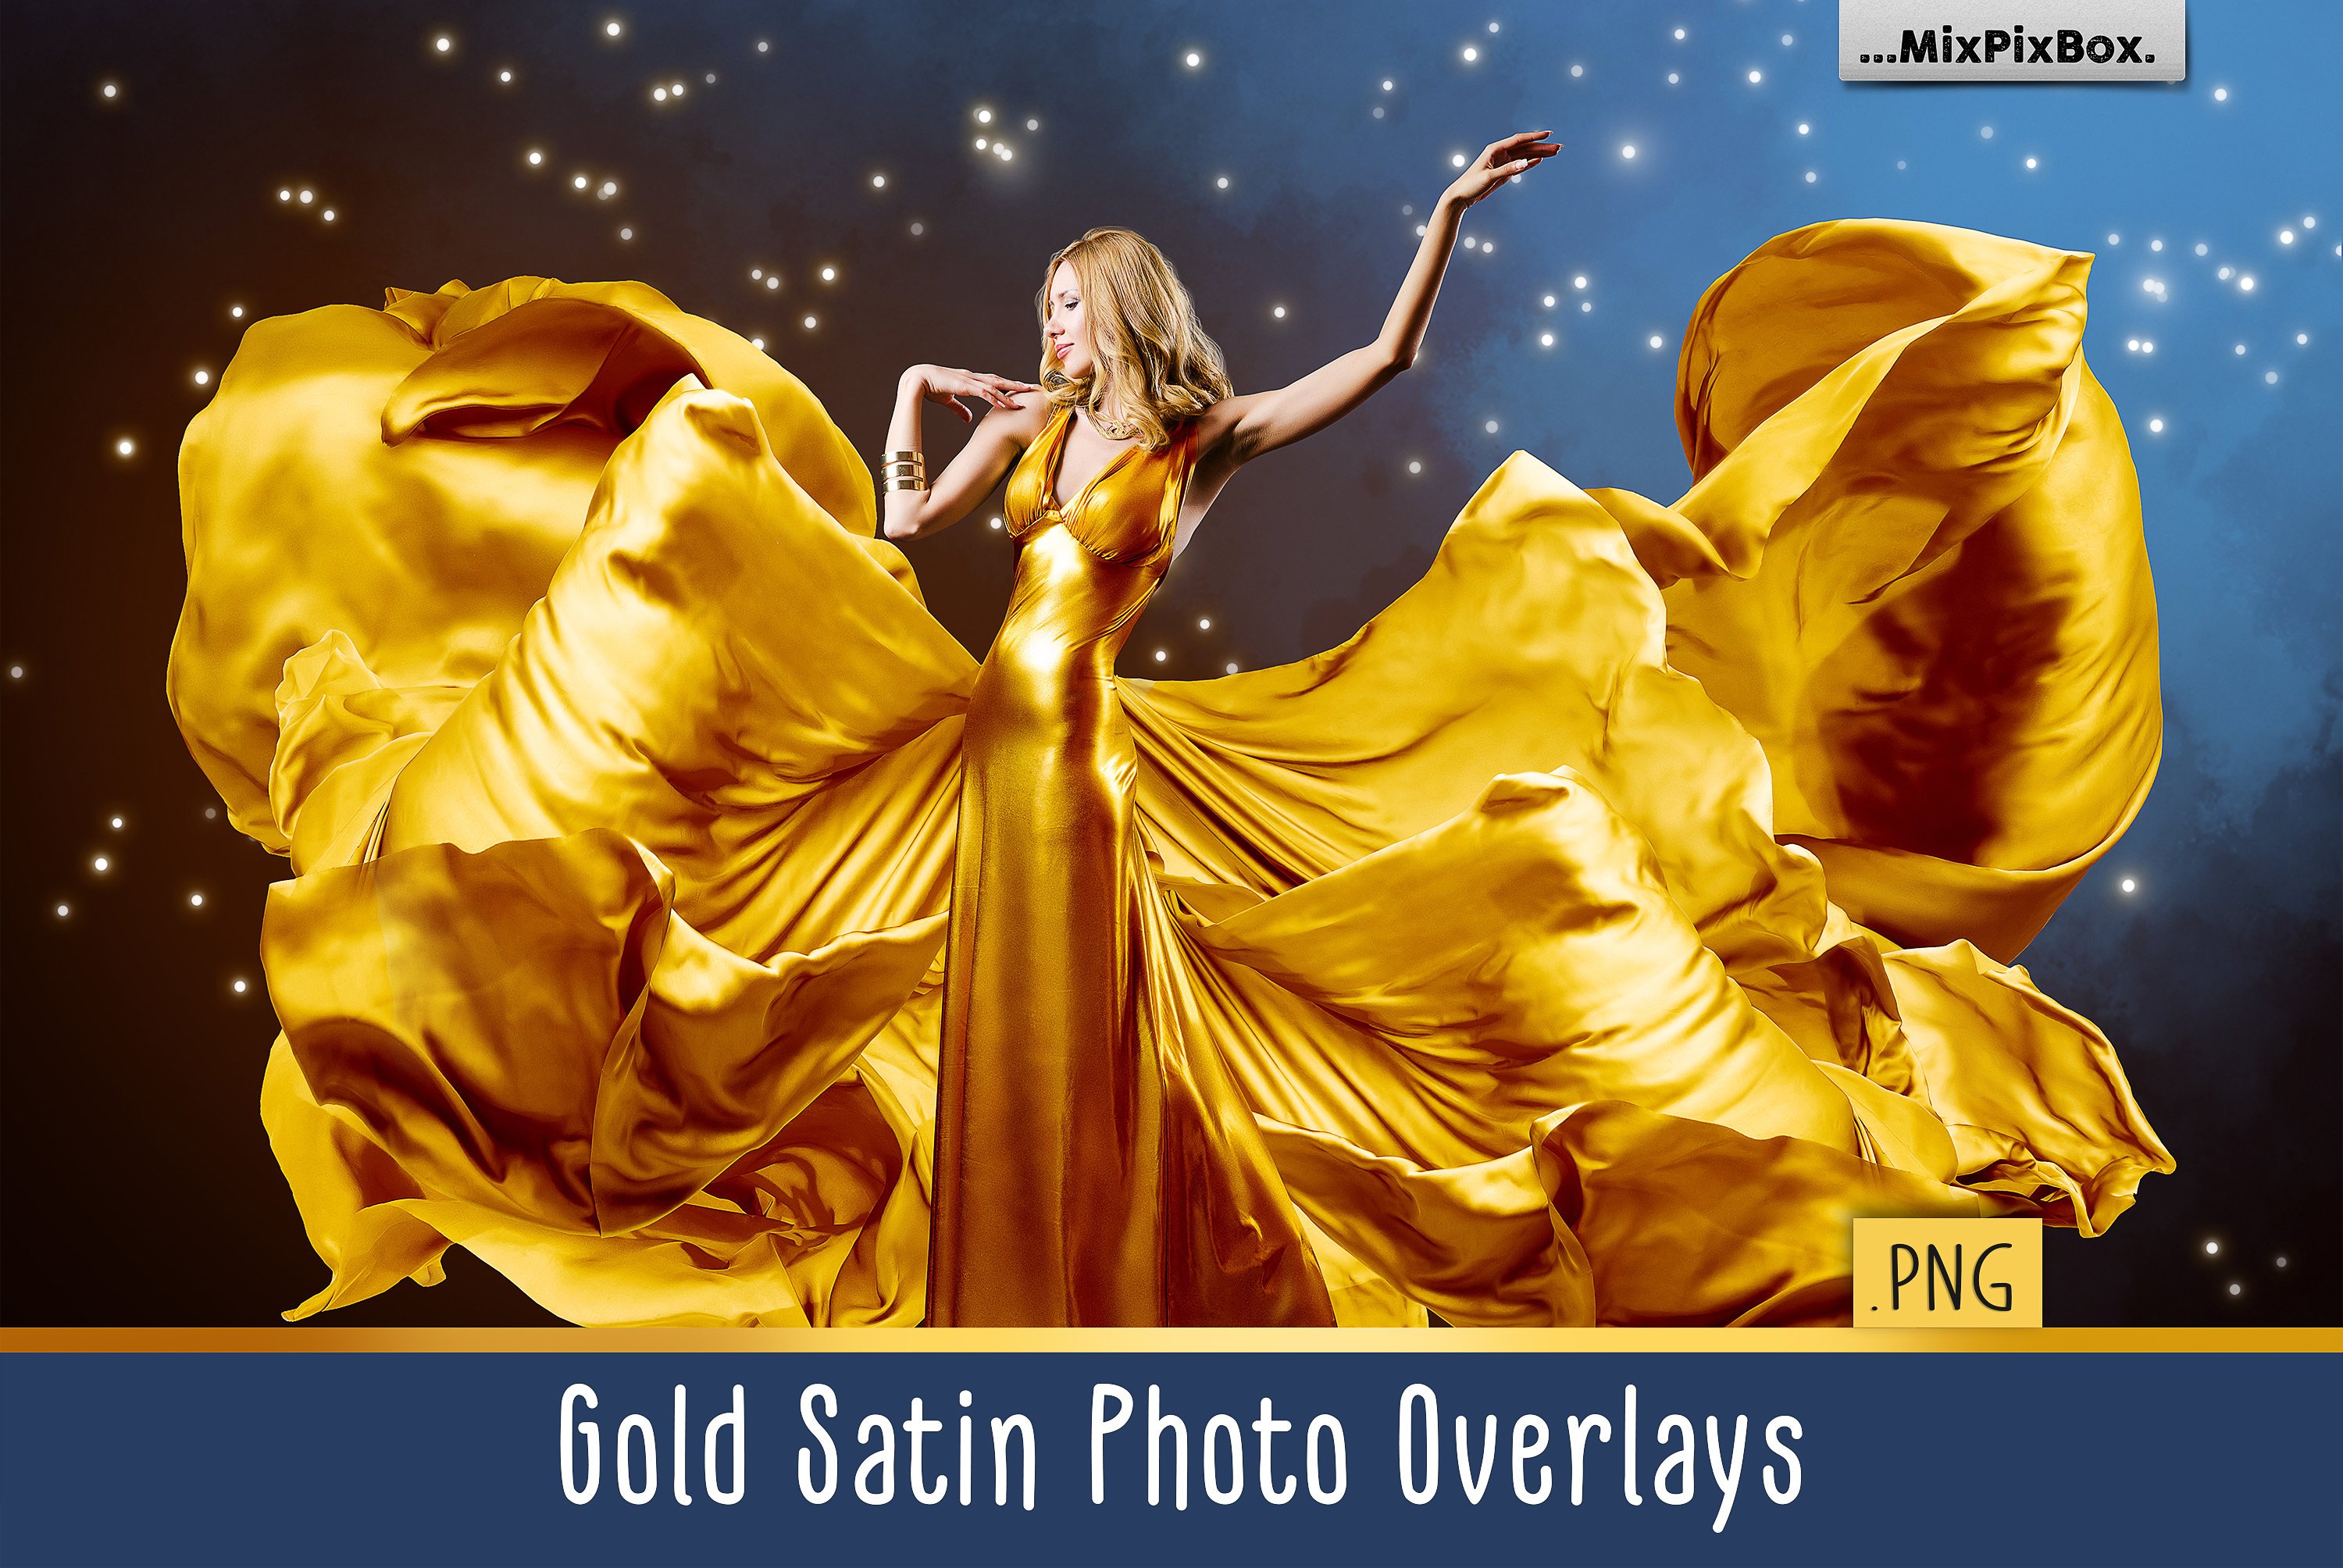 Gold Satin Photo Overlayscover image.